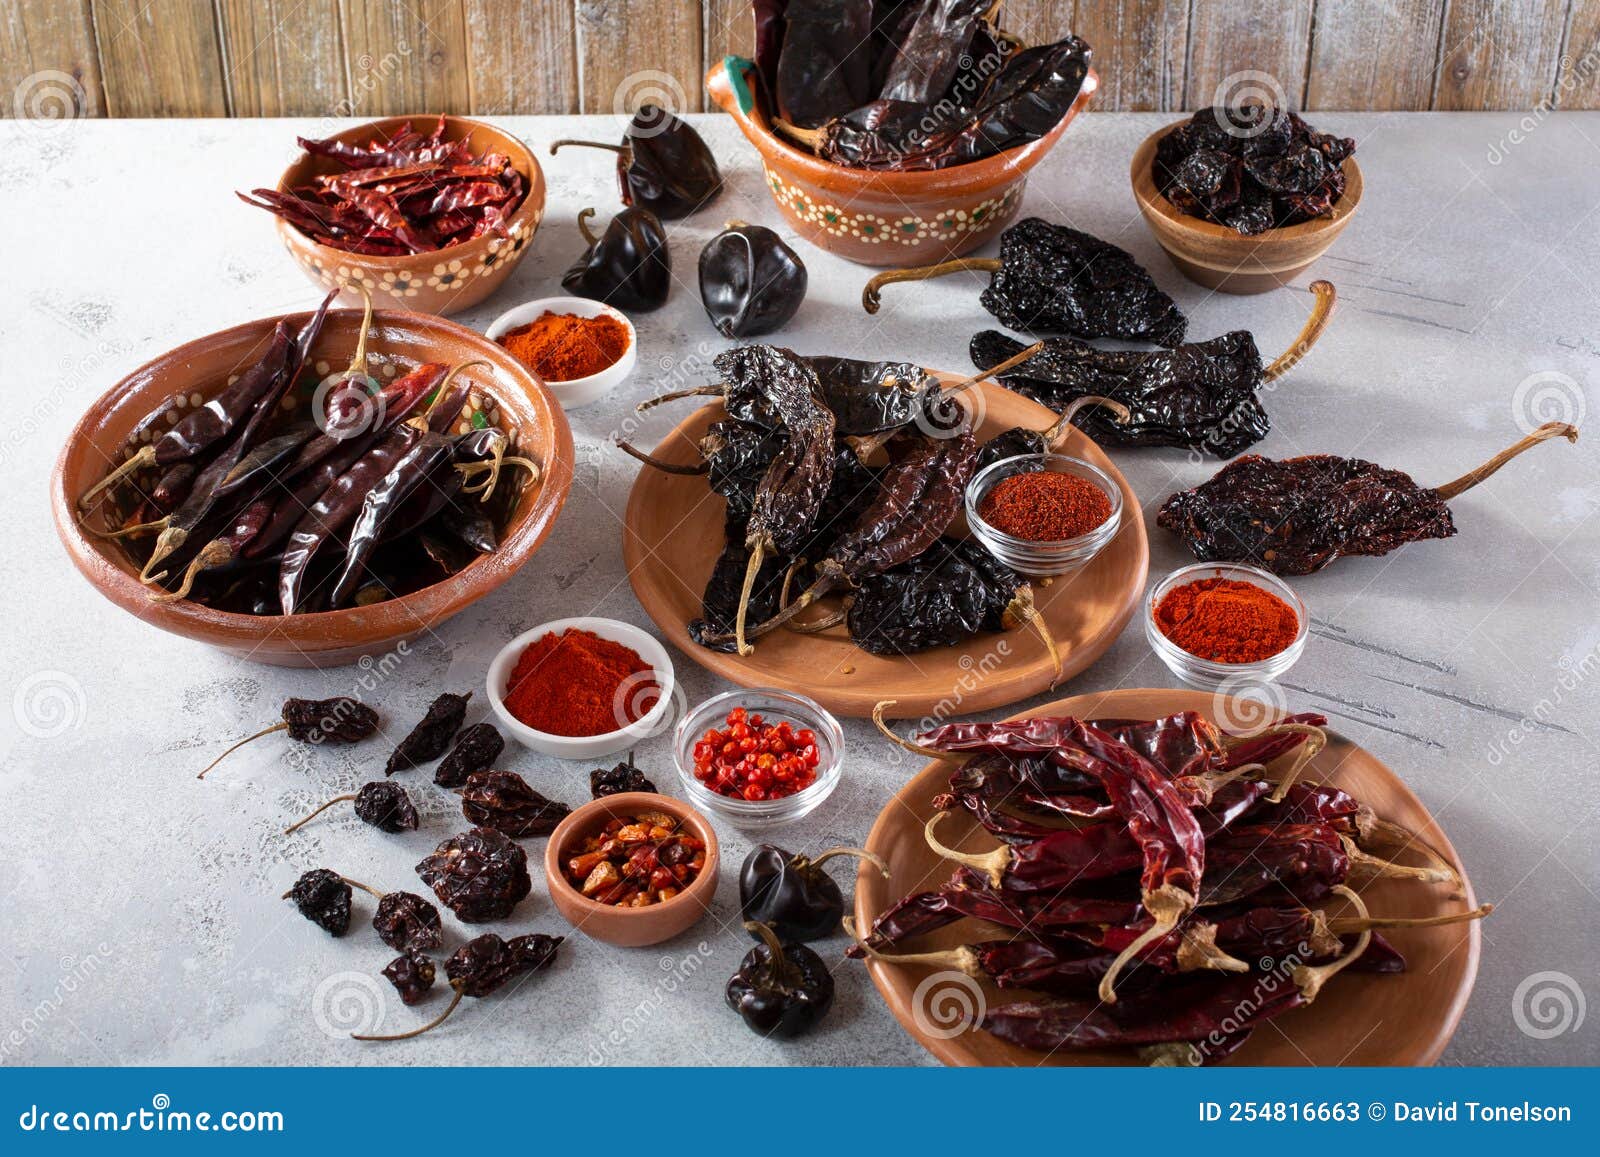 variety of dried chili peppers, chile